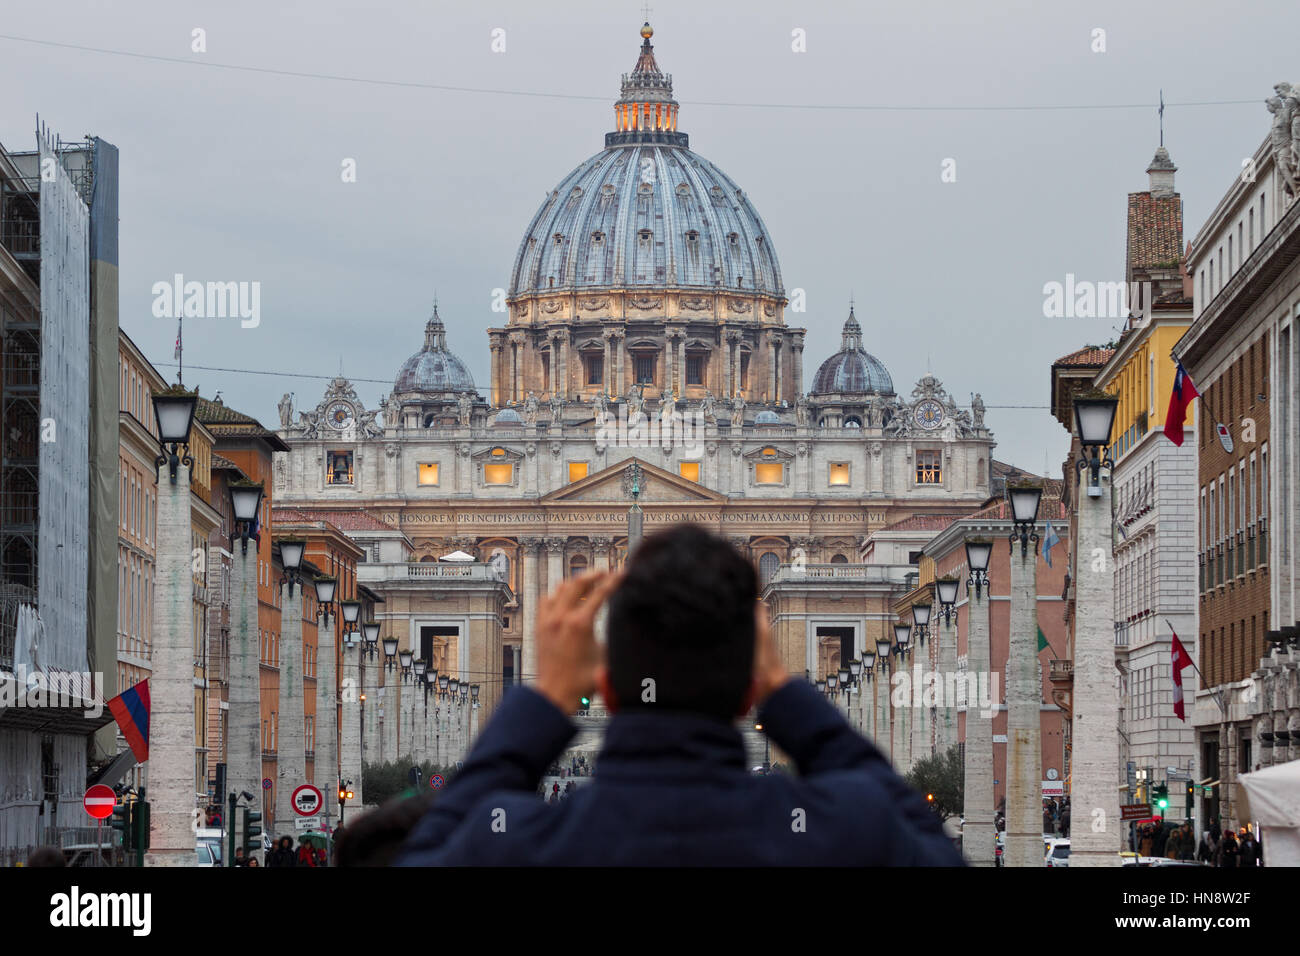 Taking a picture of St Peter's Basilica Stock Photo